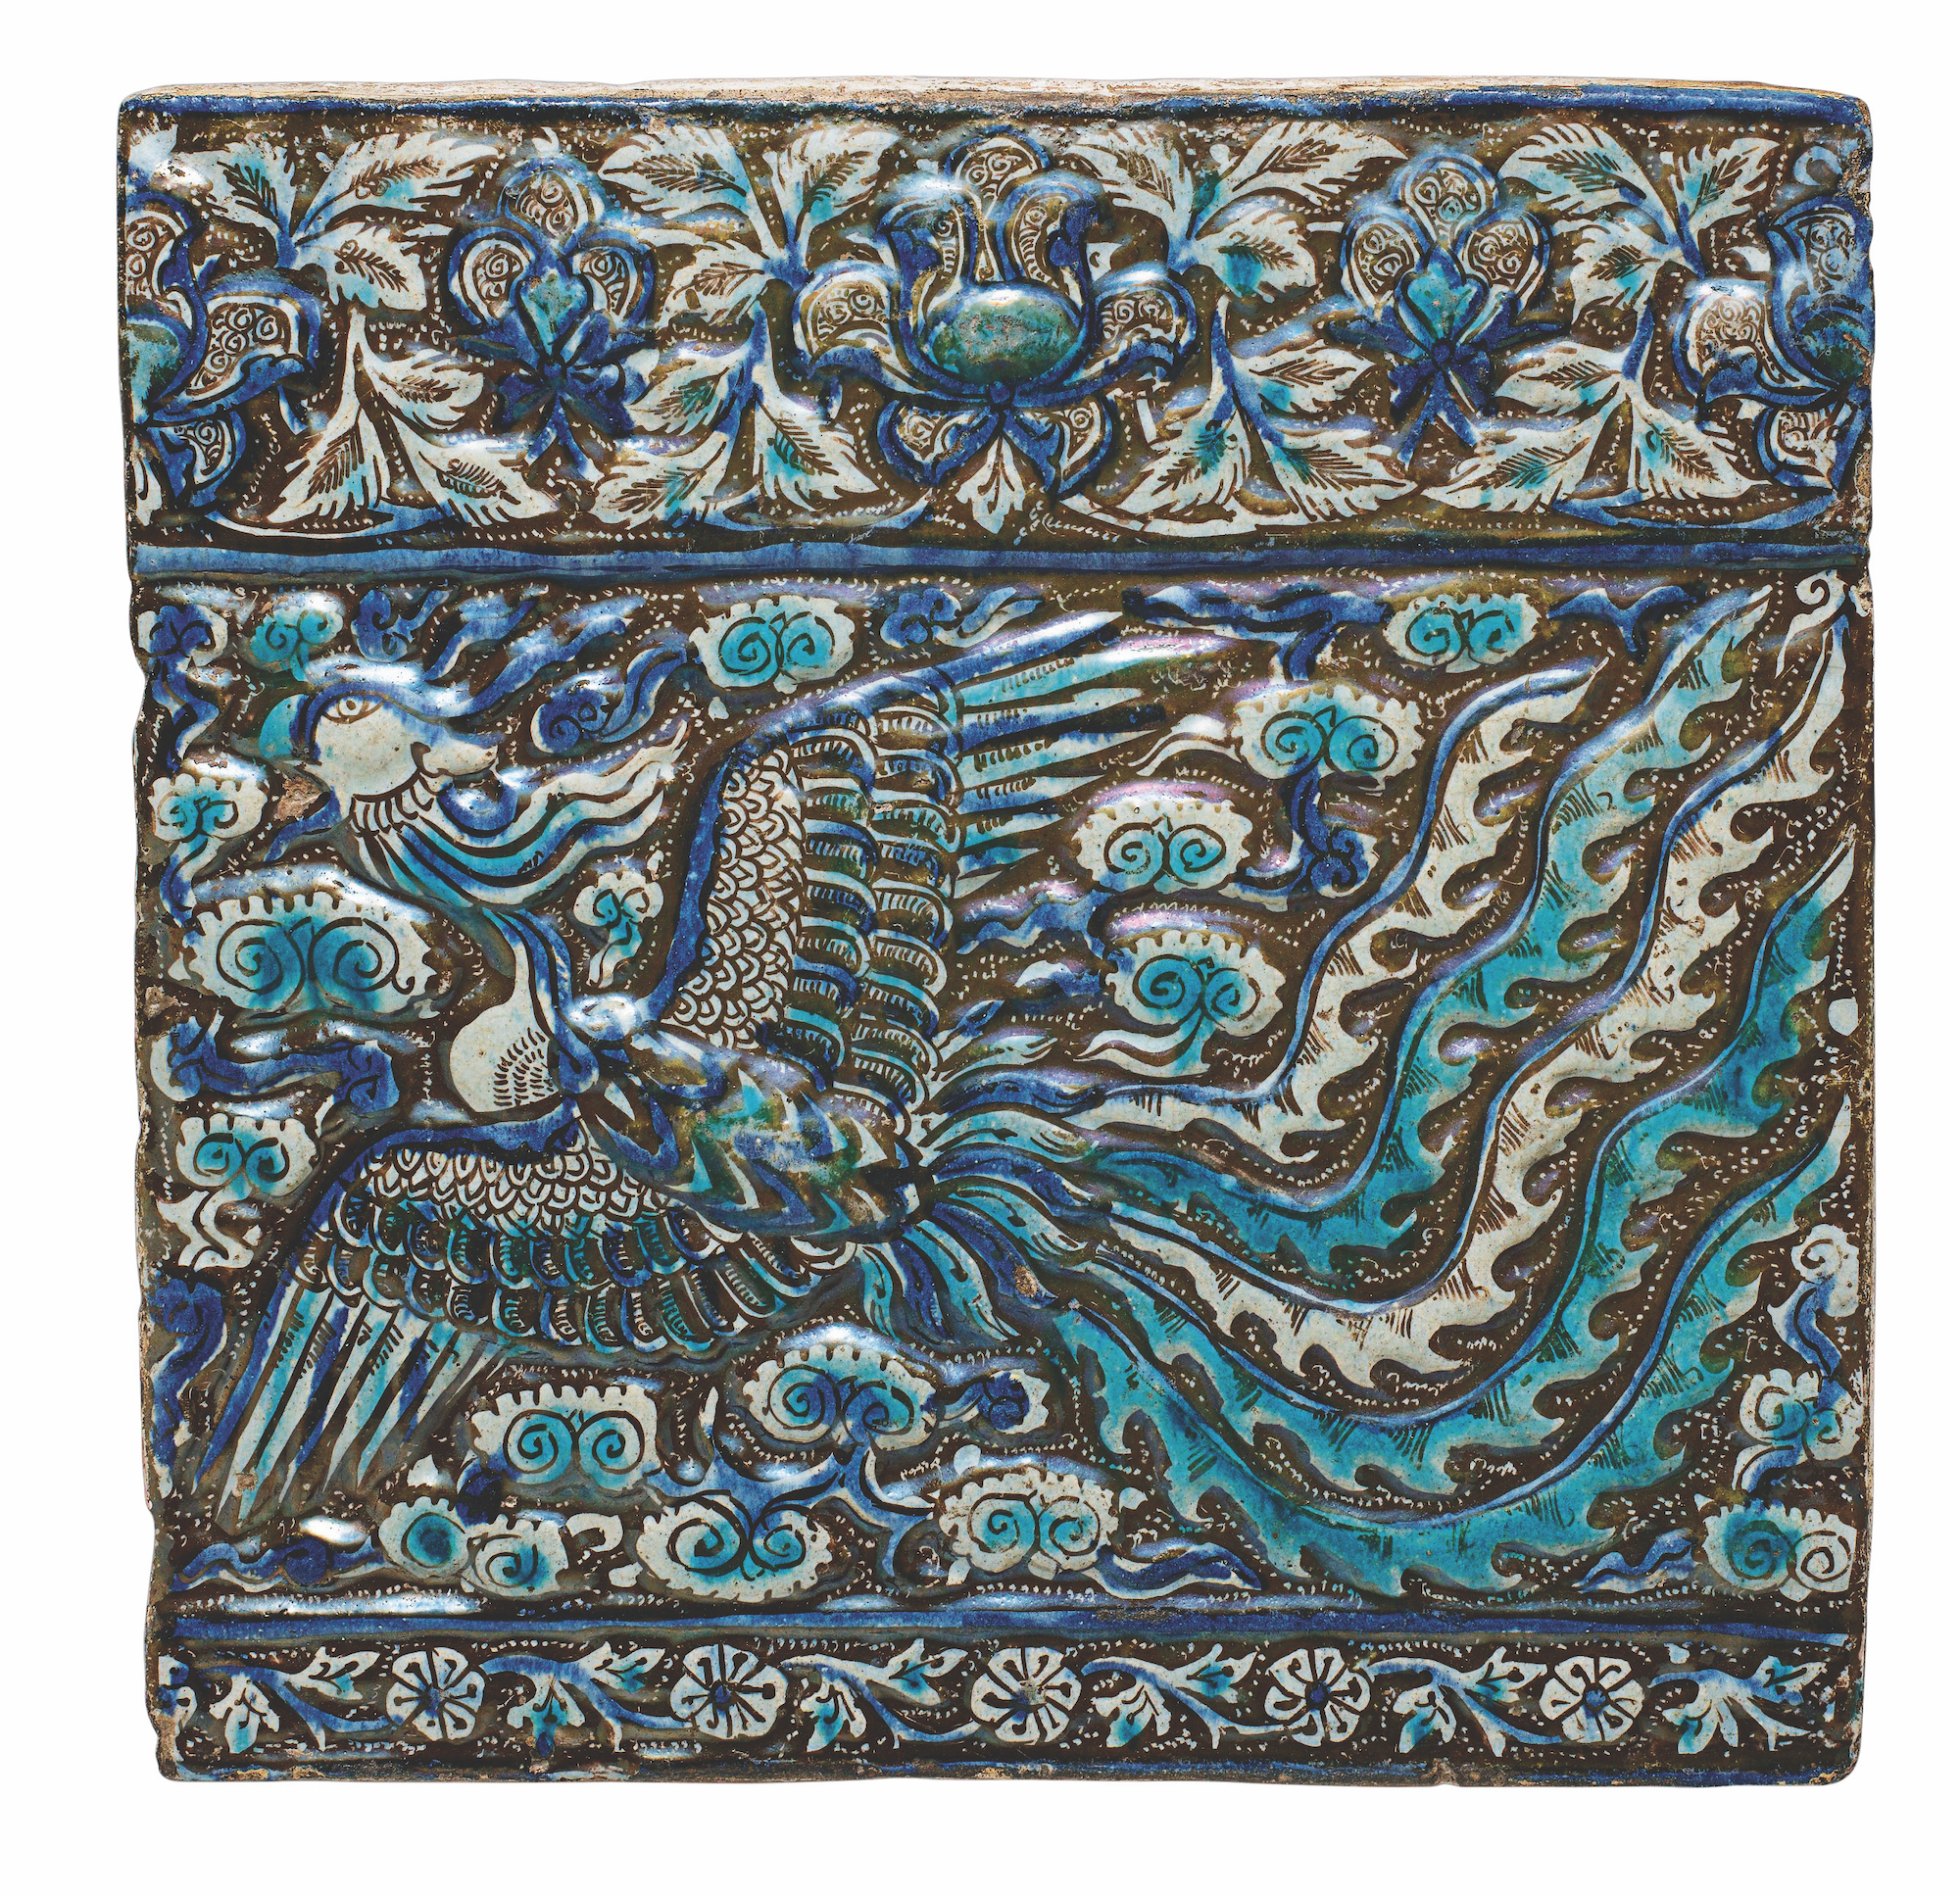 Tile with image of phoenix, late 13th century. Stonepaste with underglaze painted in blue and turquoise and lustre-painted on opaque white ground, 37.5 × 36.2 cm / 14 ¾ × 14 ¼ in. Metropolitan Museum of Art, New York